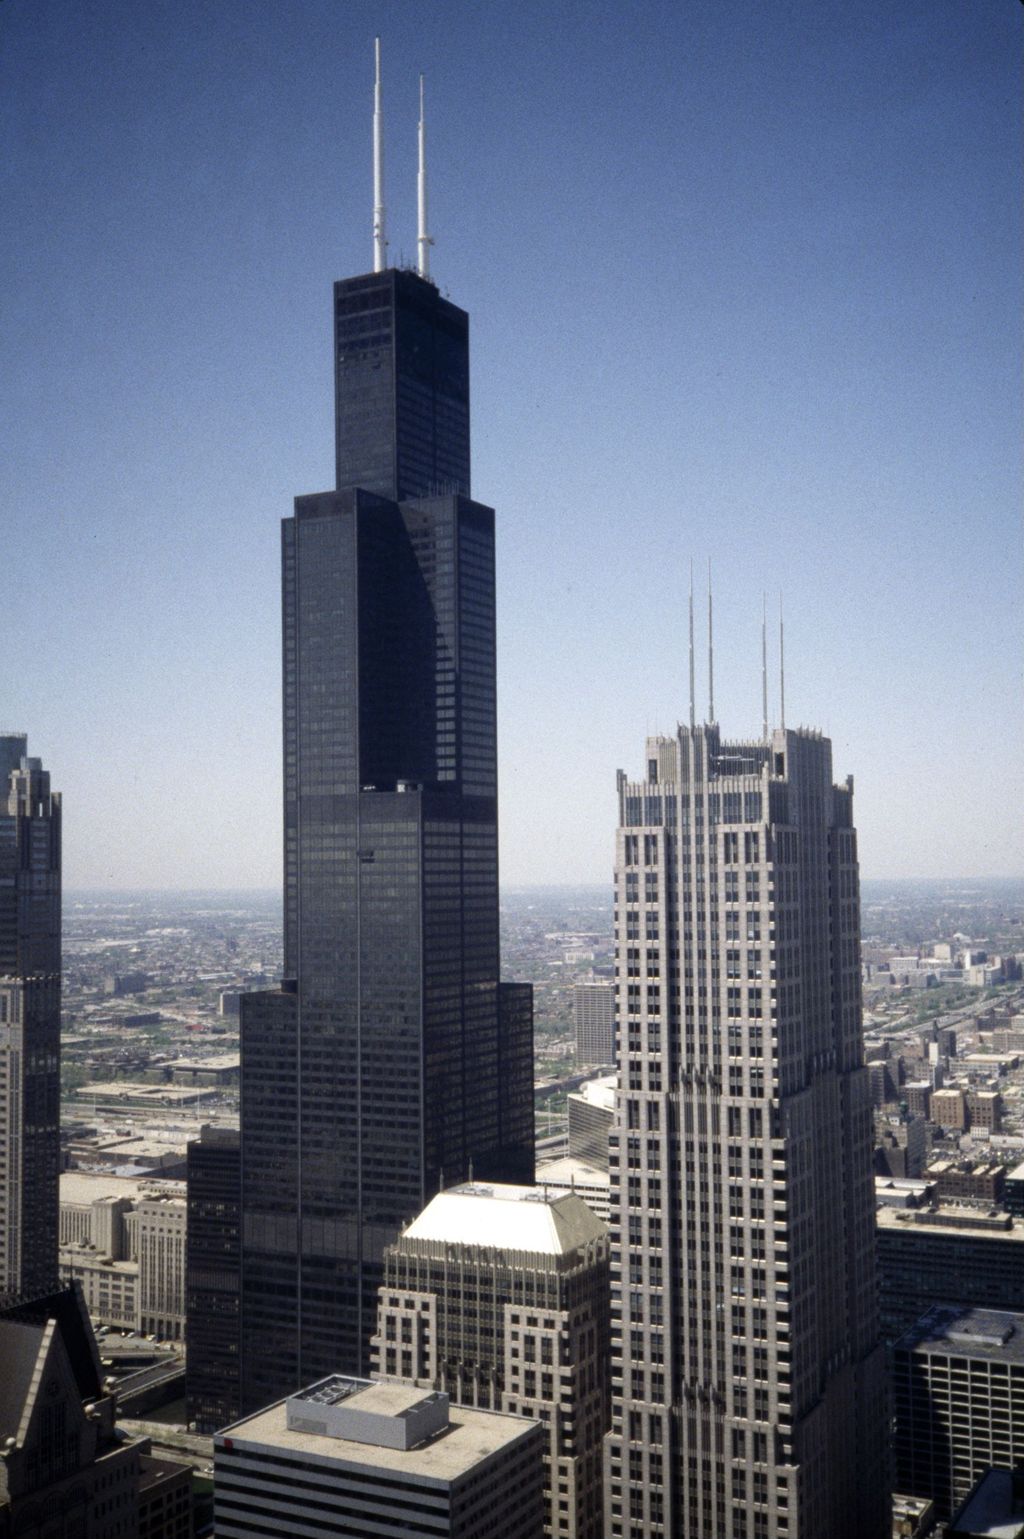 Miniature of Sears Tower and AT&T Corporate Center